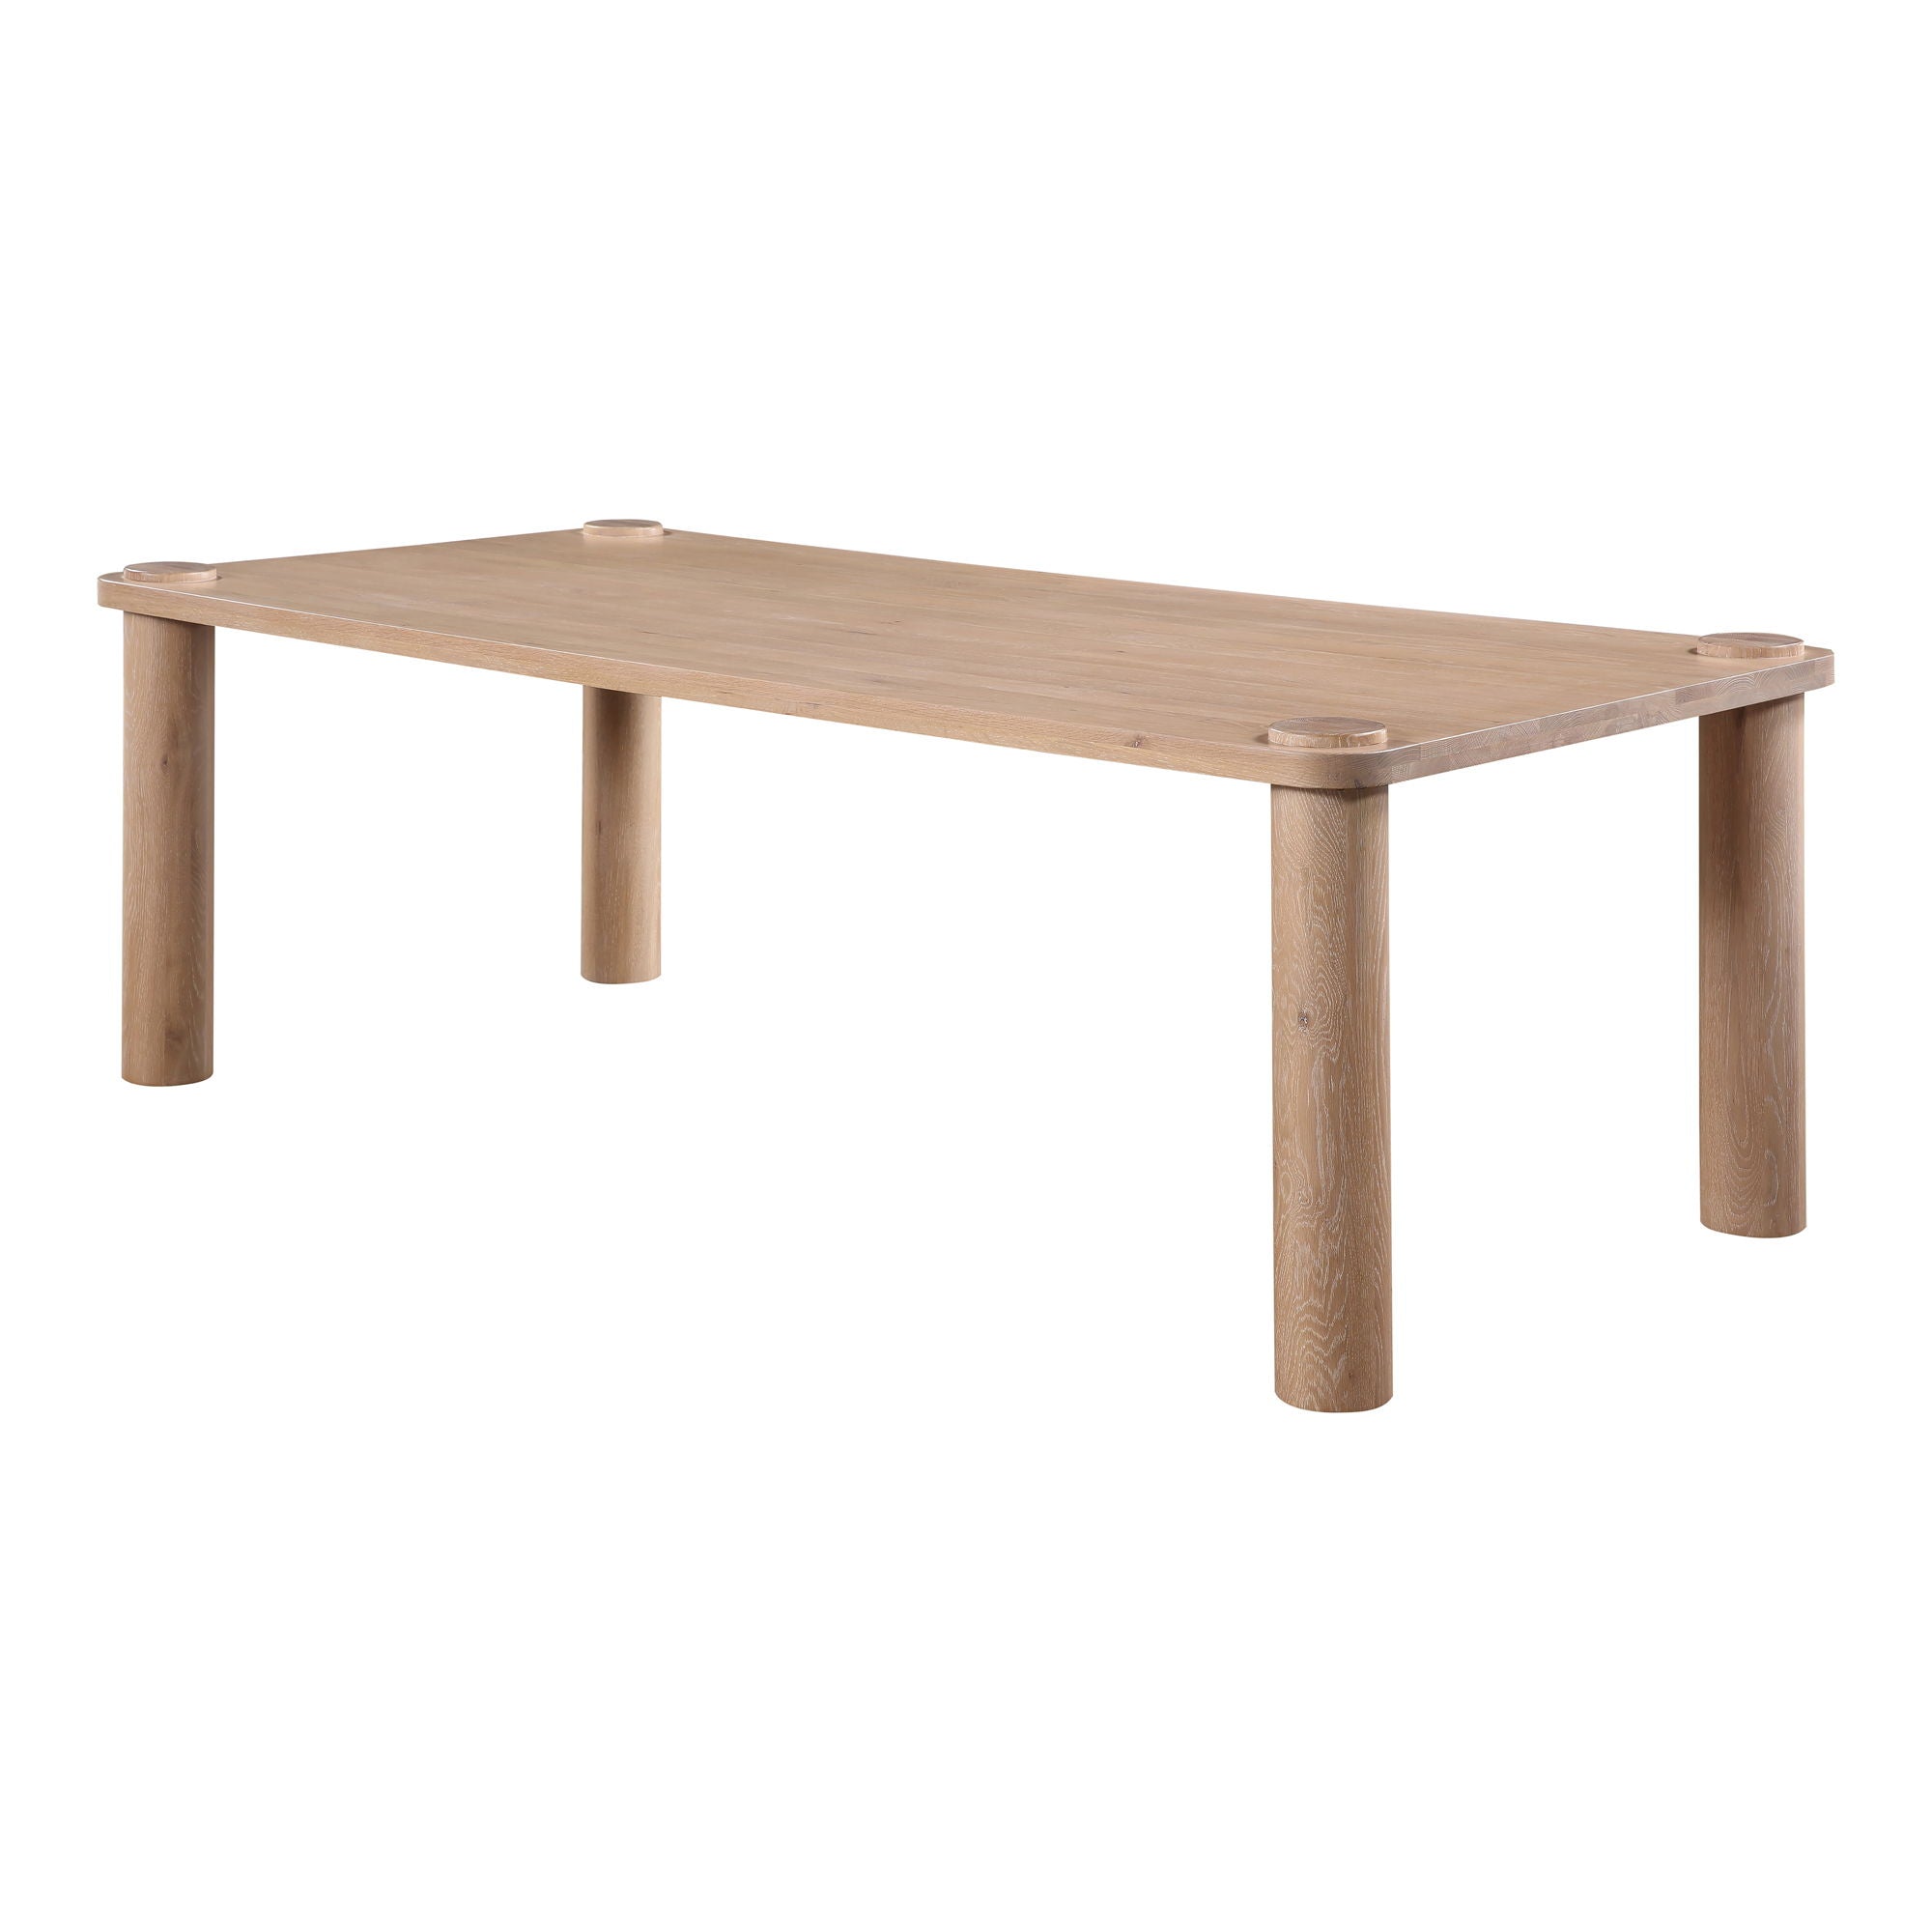 Century - Dining Table - White Wash